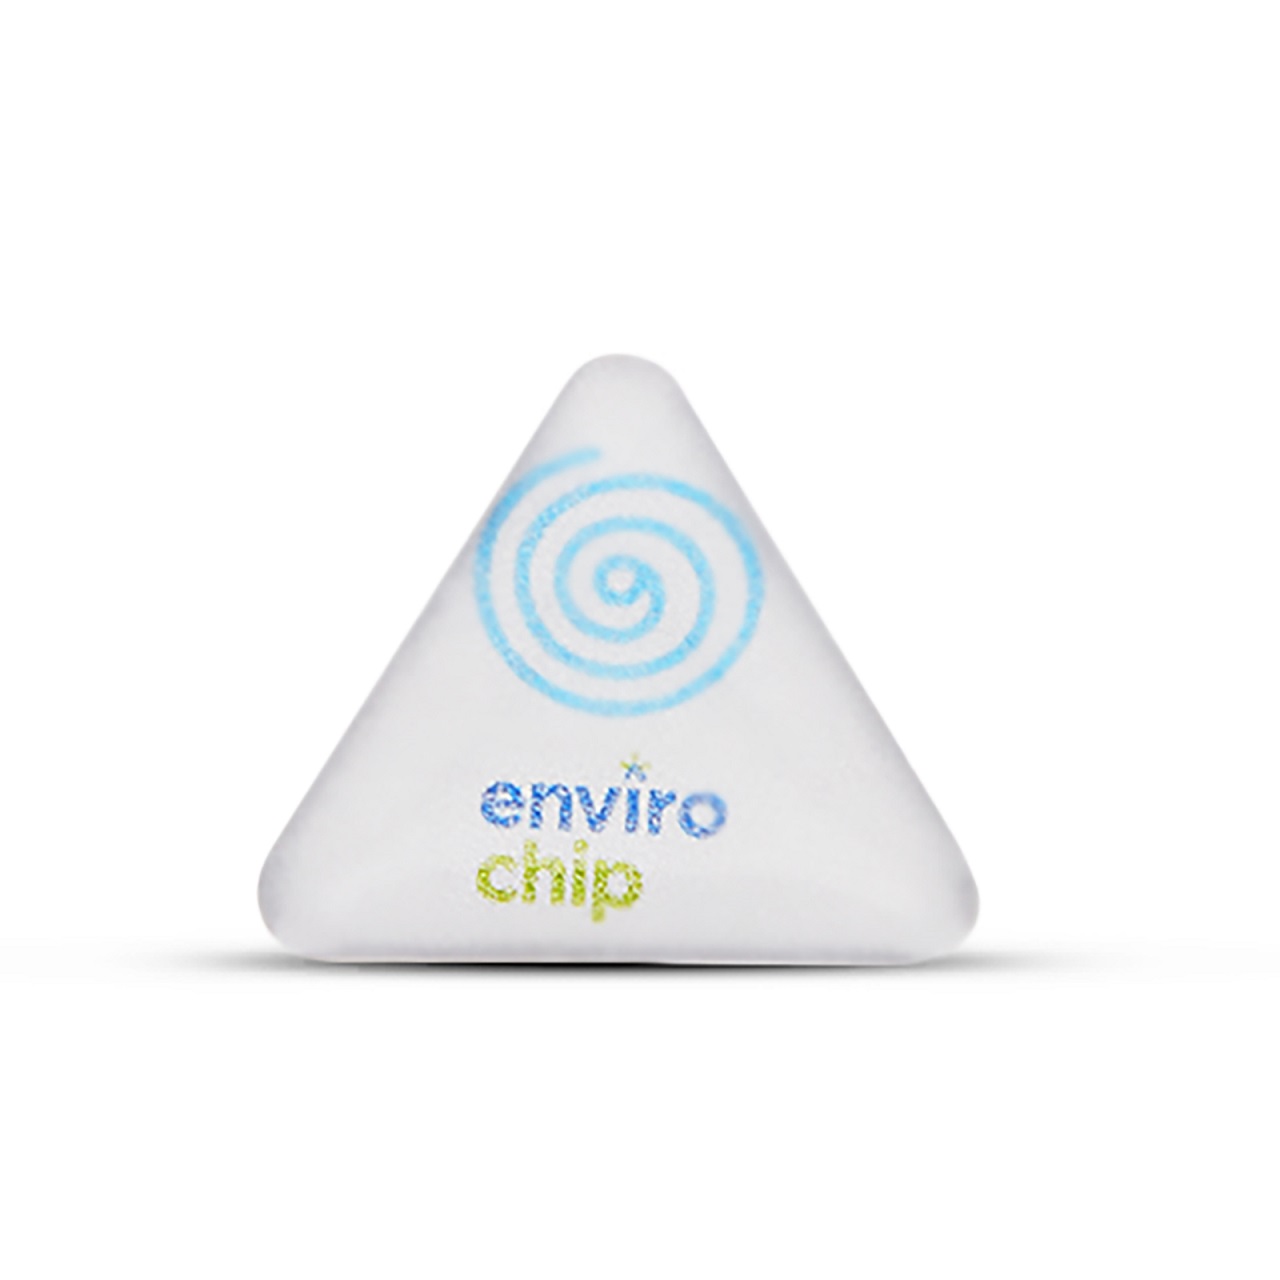 envirochip-clinically-tested-patented-anti-radiation-chip-for-mobile-phone-elements-design-air-silver